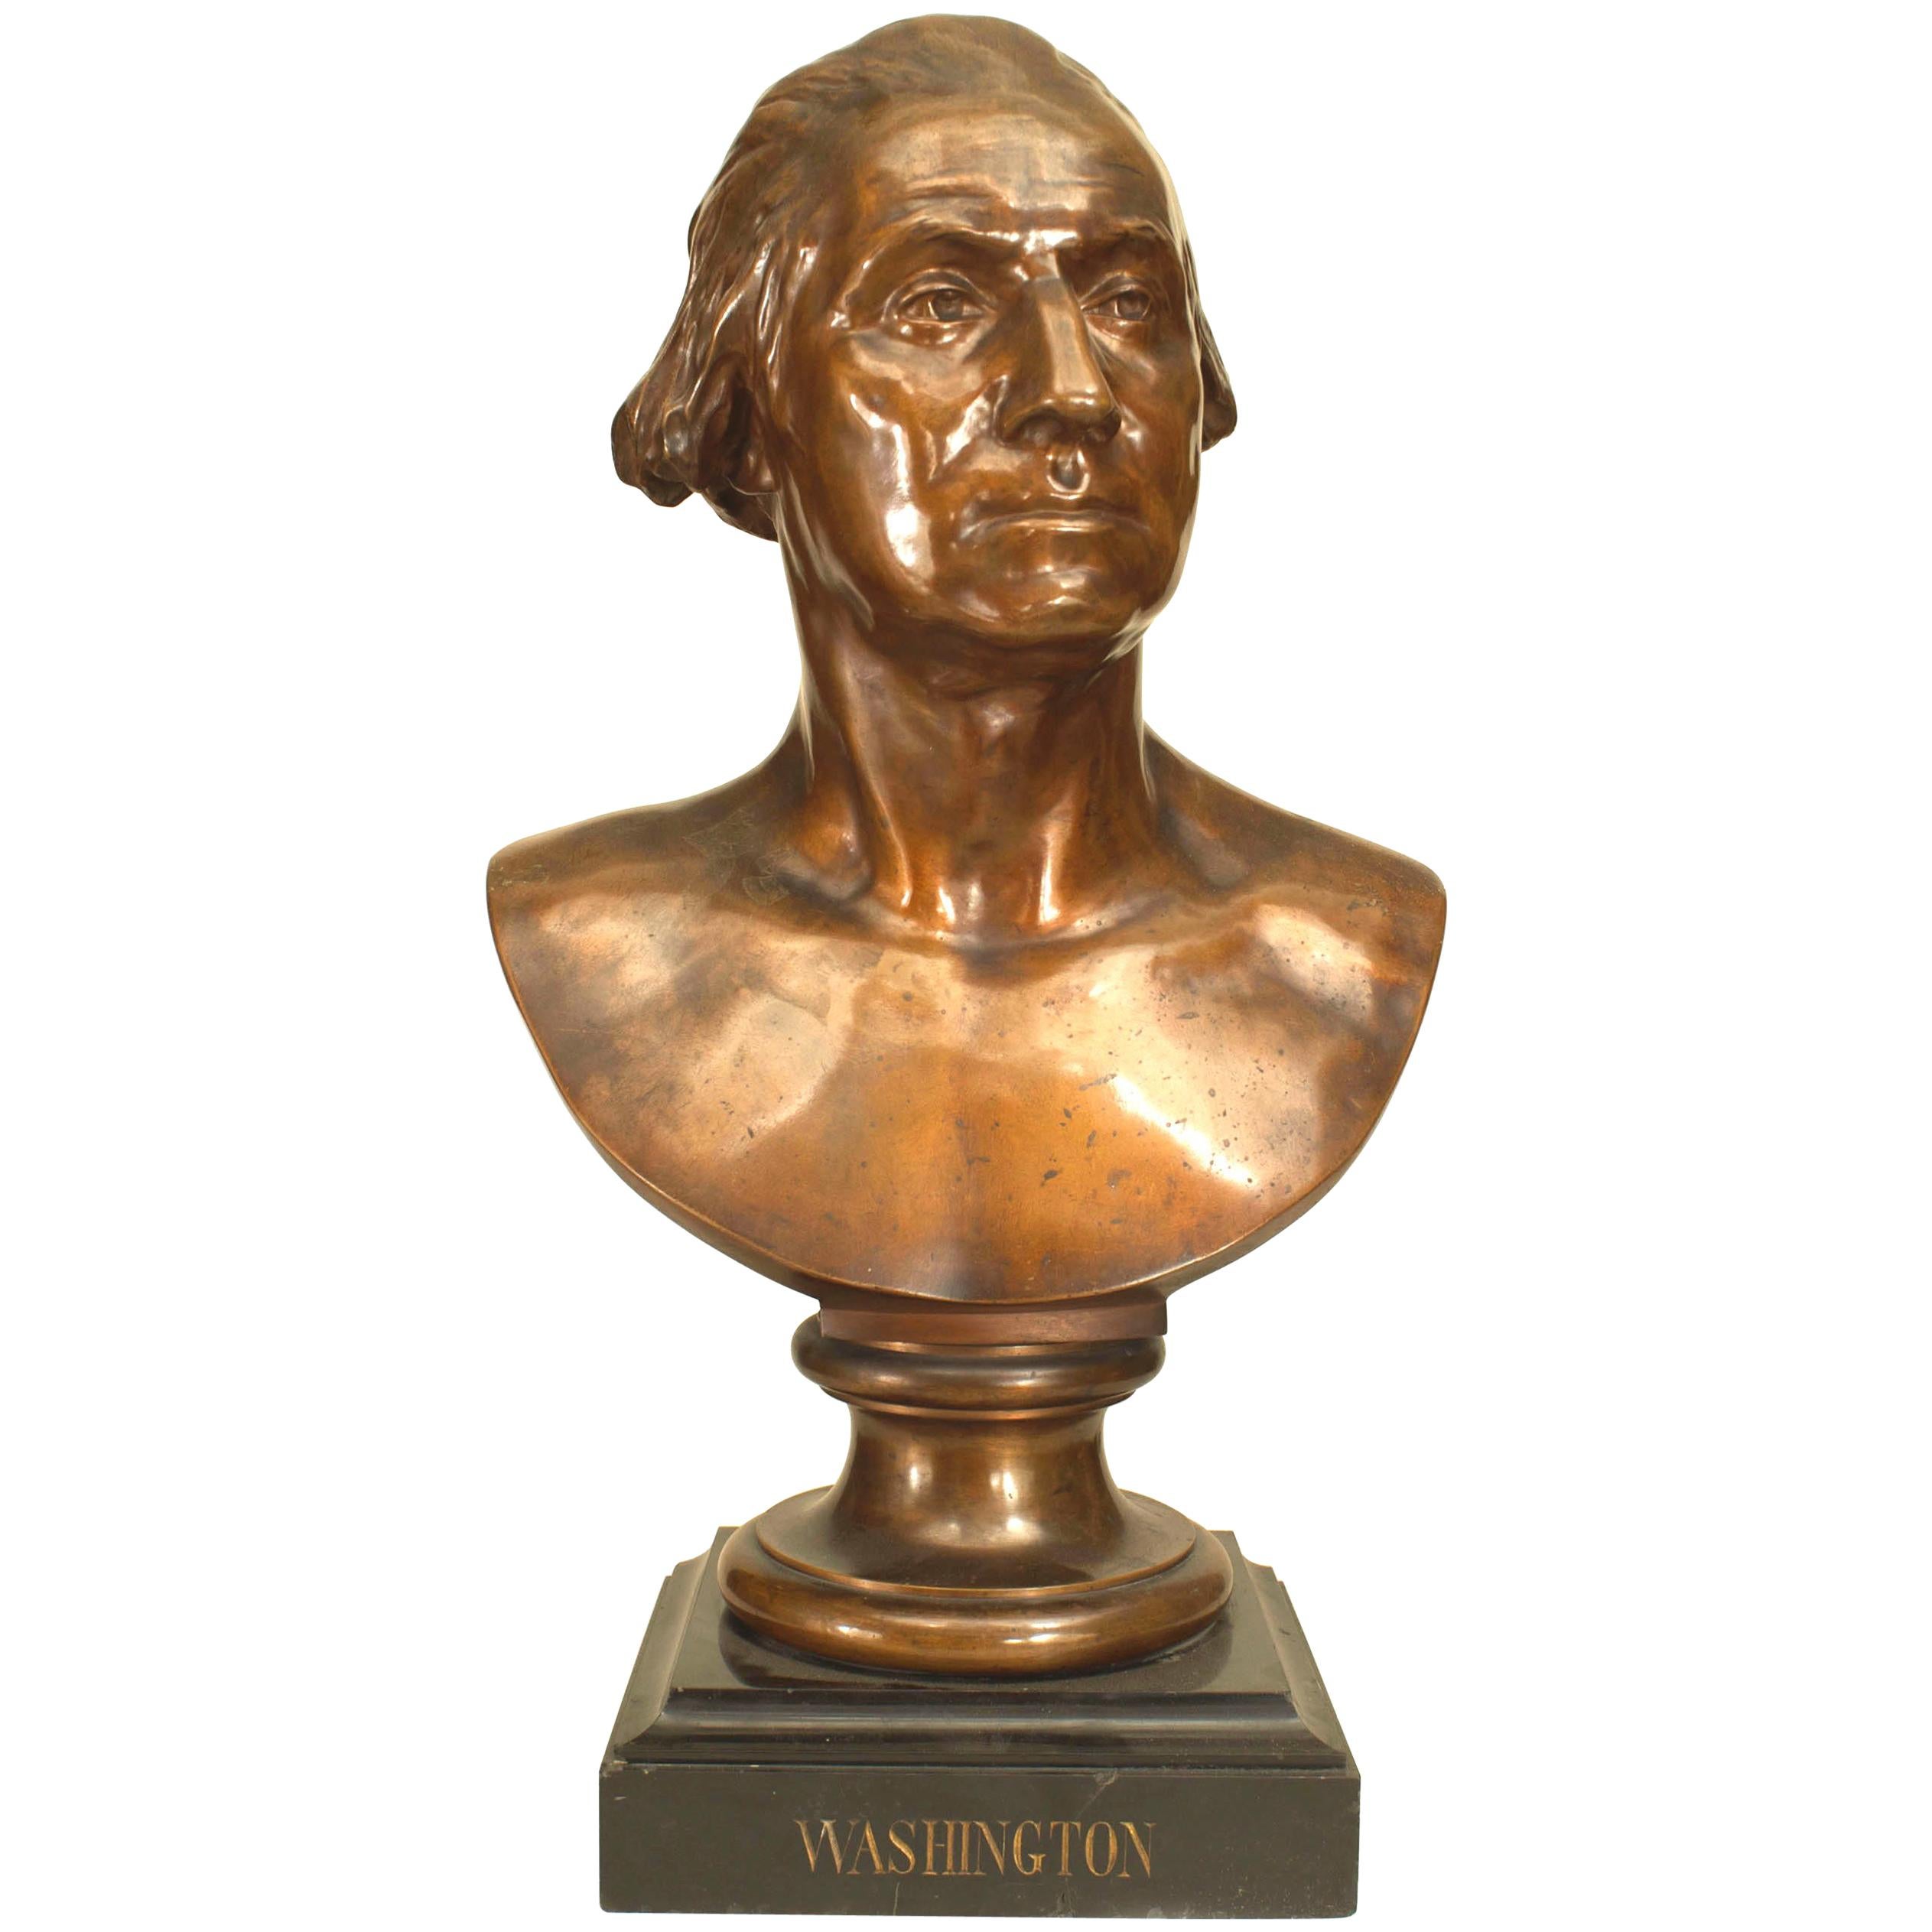 What was Jean Antoine Houdon's sculpture of George Washington made of?